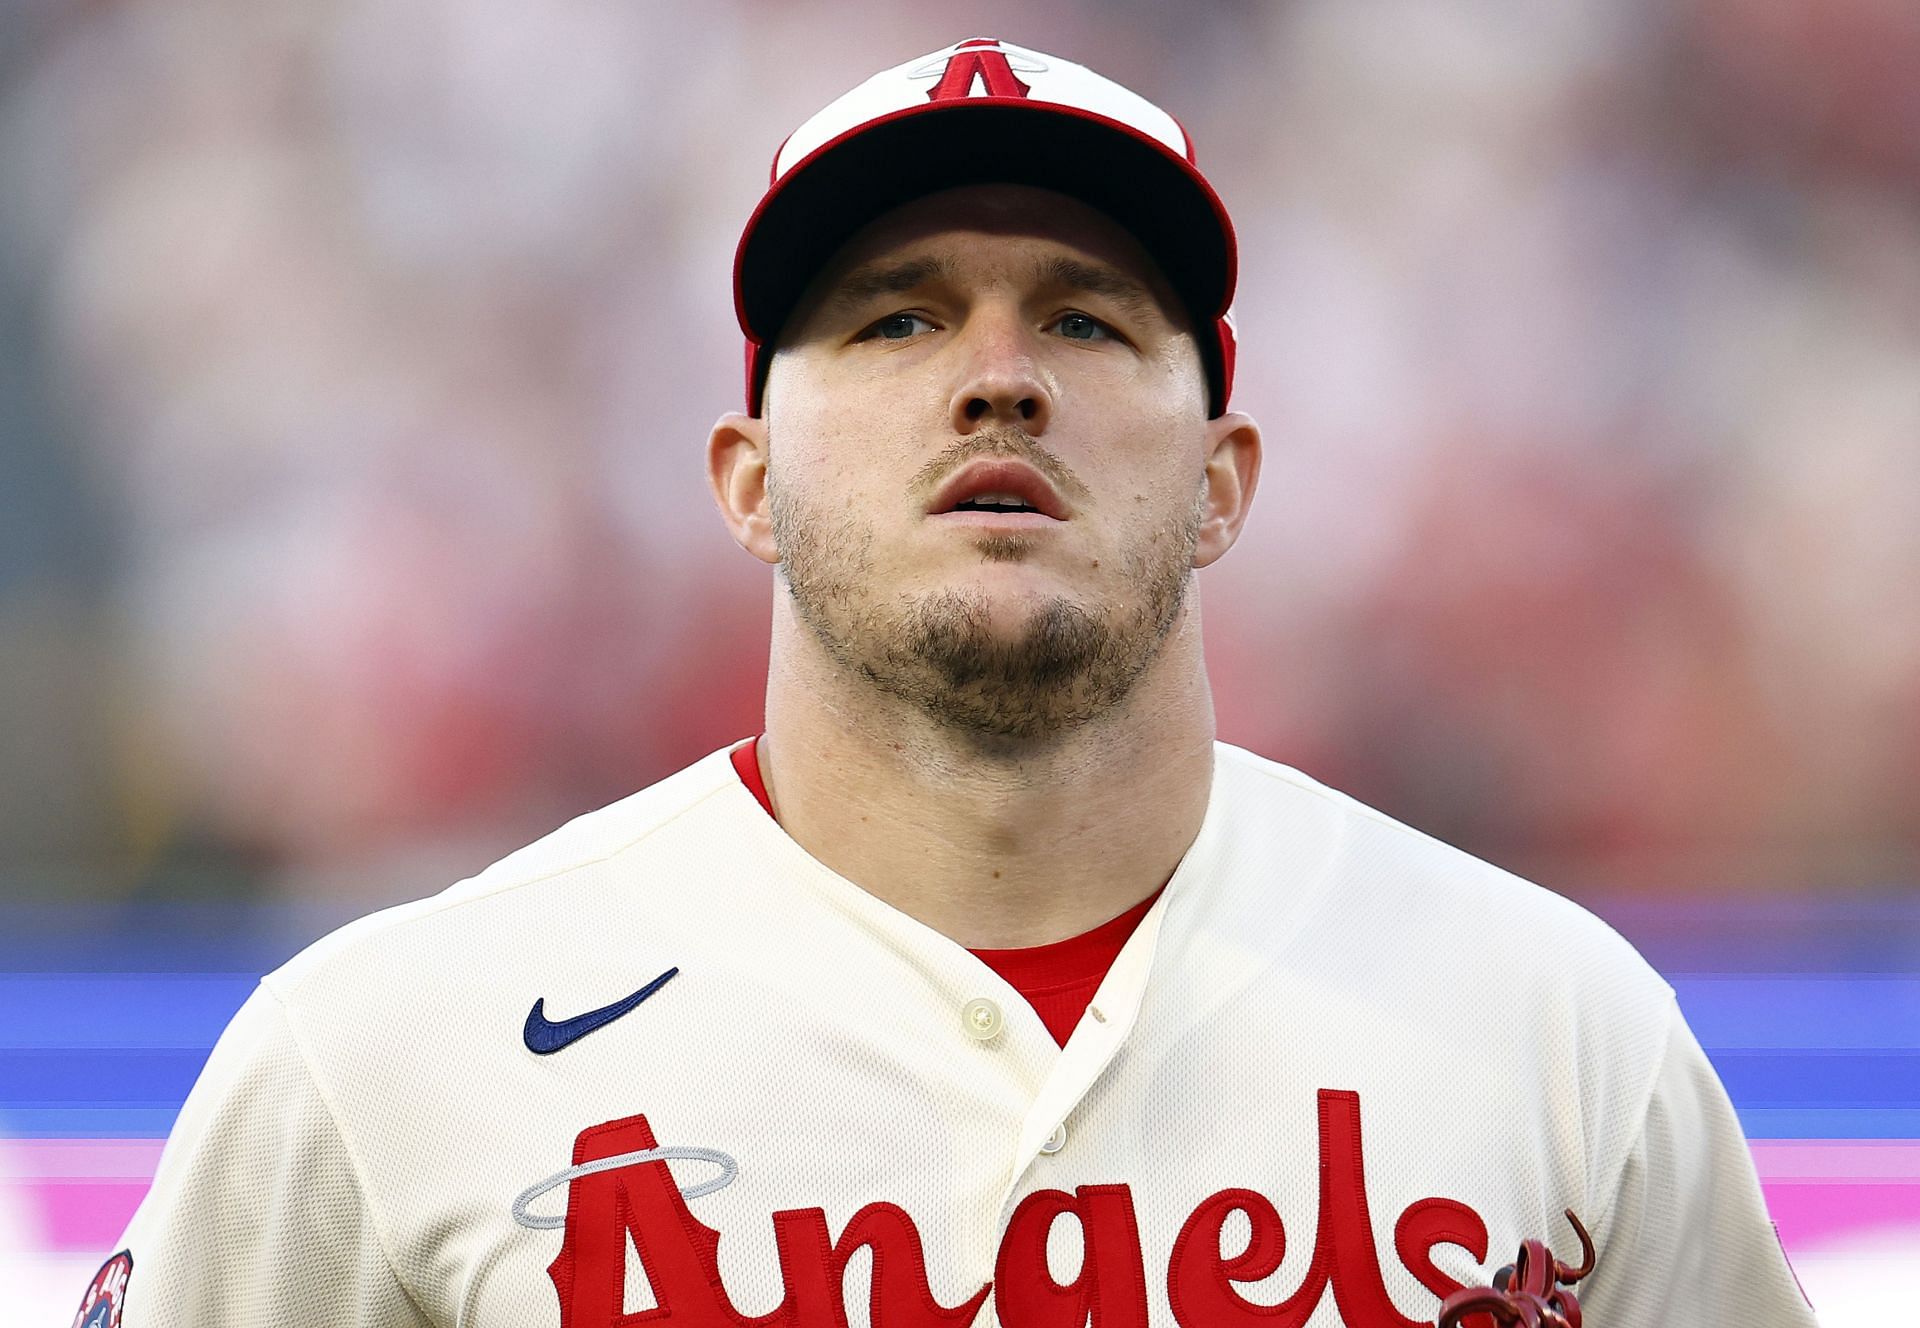 Mike Trout will be on the shelf for a while